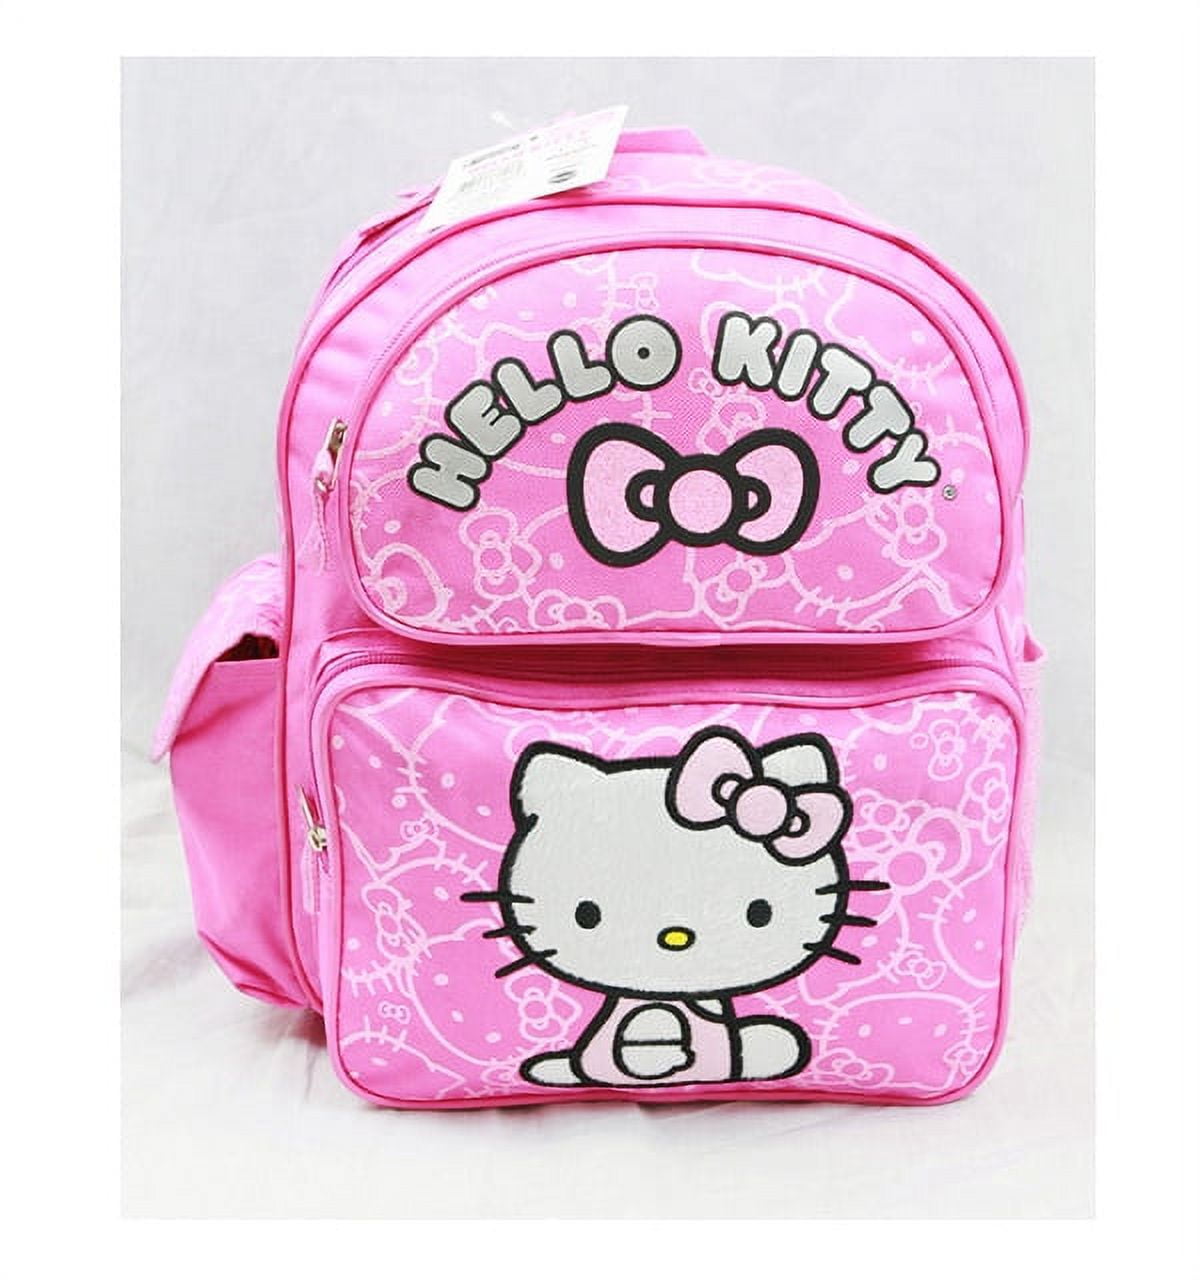 Buy Kitty Purse Online In India - Etsy India